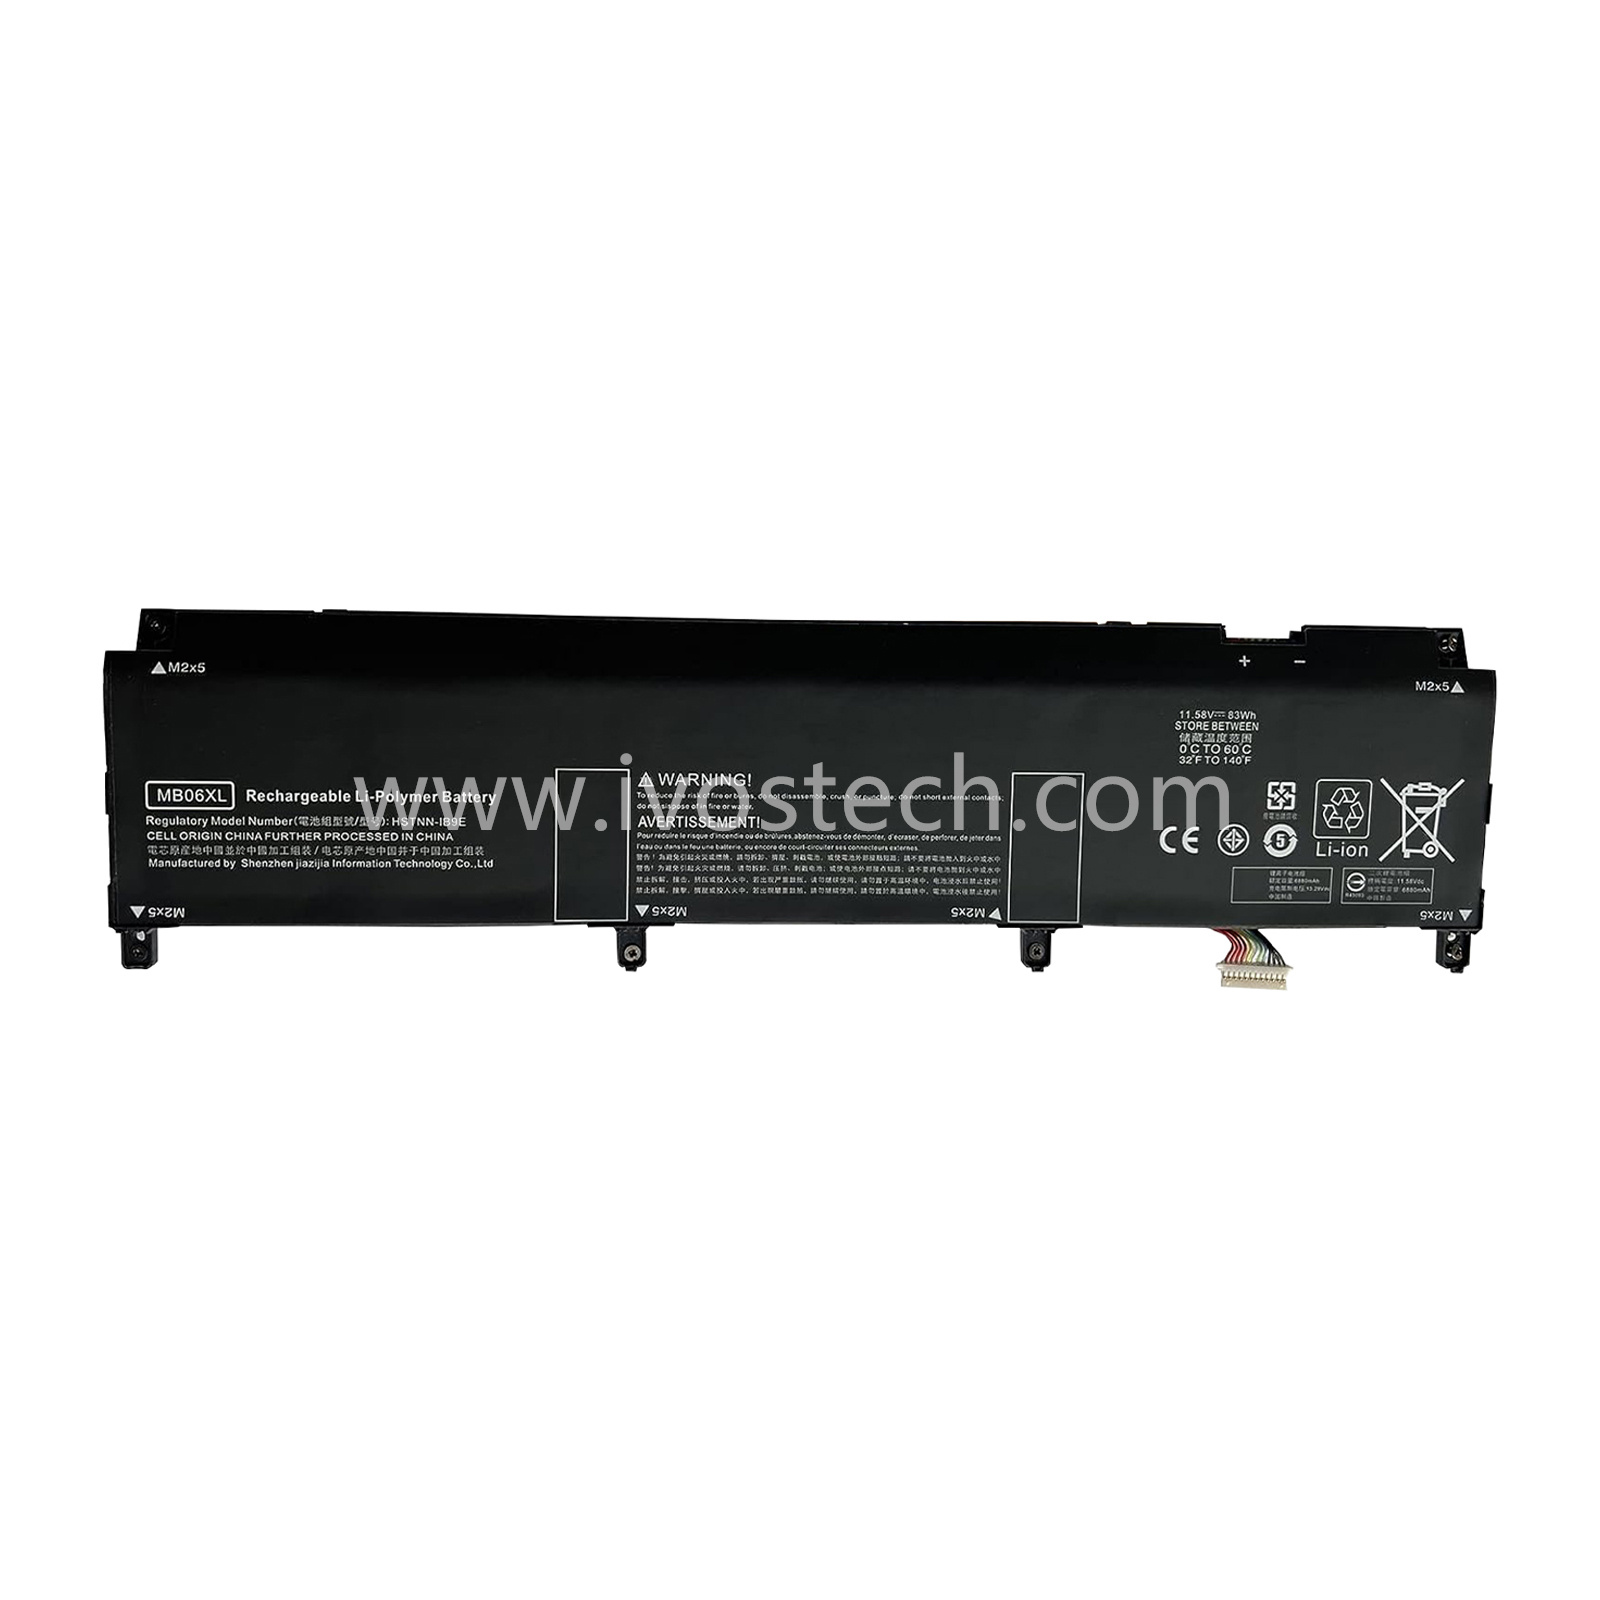 MB06XL 83Wh 11.58V Replacement Laptop Battery for HP ZBook Studio 15 G7 ZBook Studio 15 G8 Series